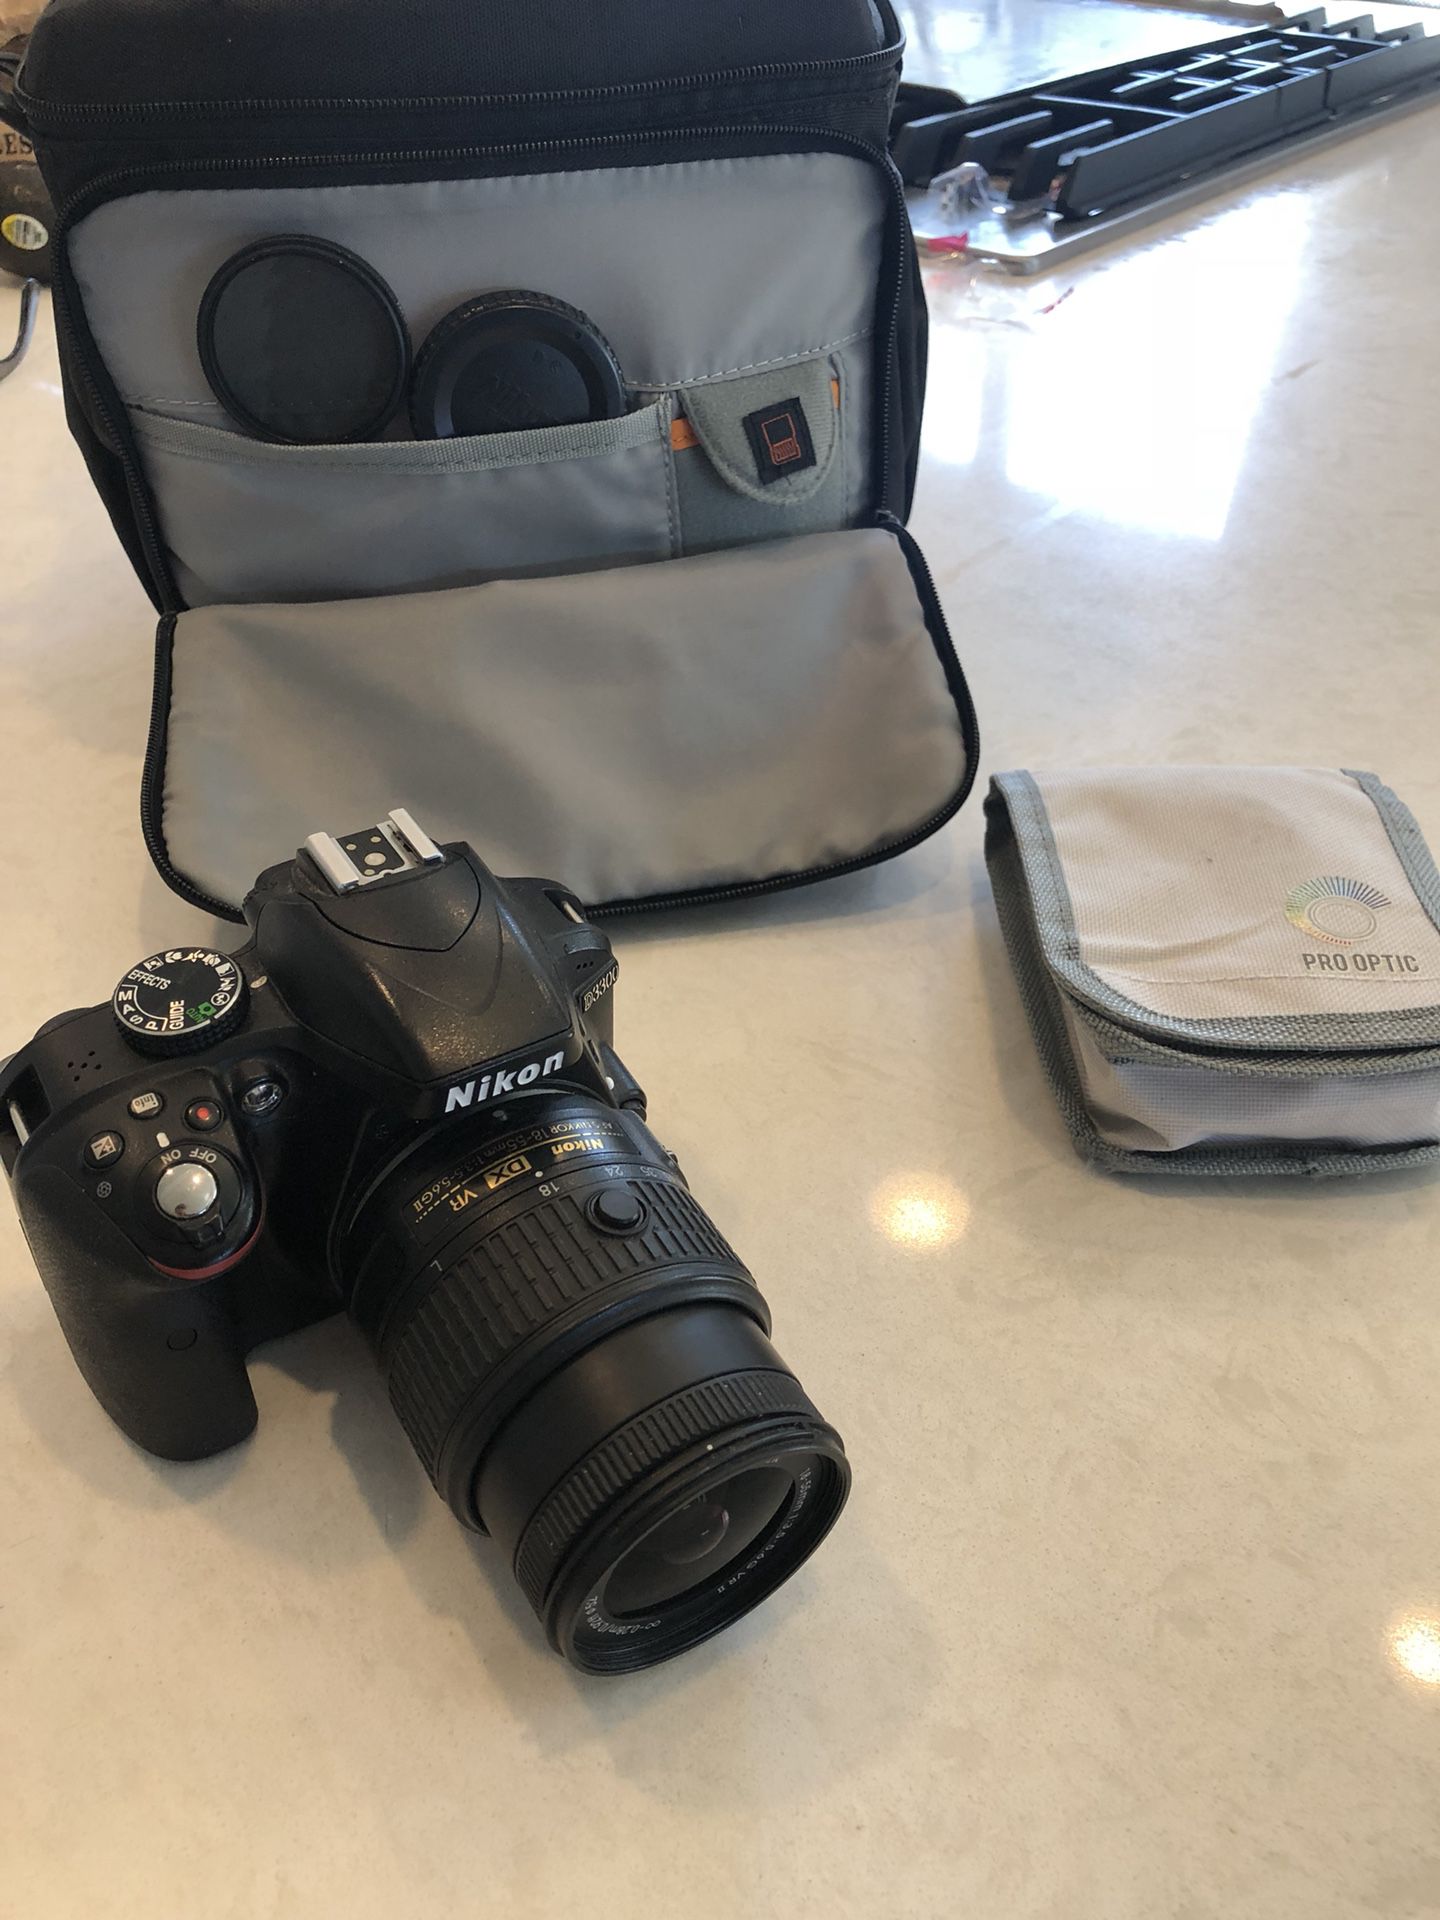 Nikon D3300 with 18-55mm lens and Lowepro carrying case